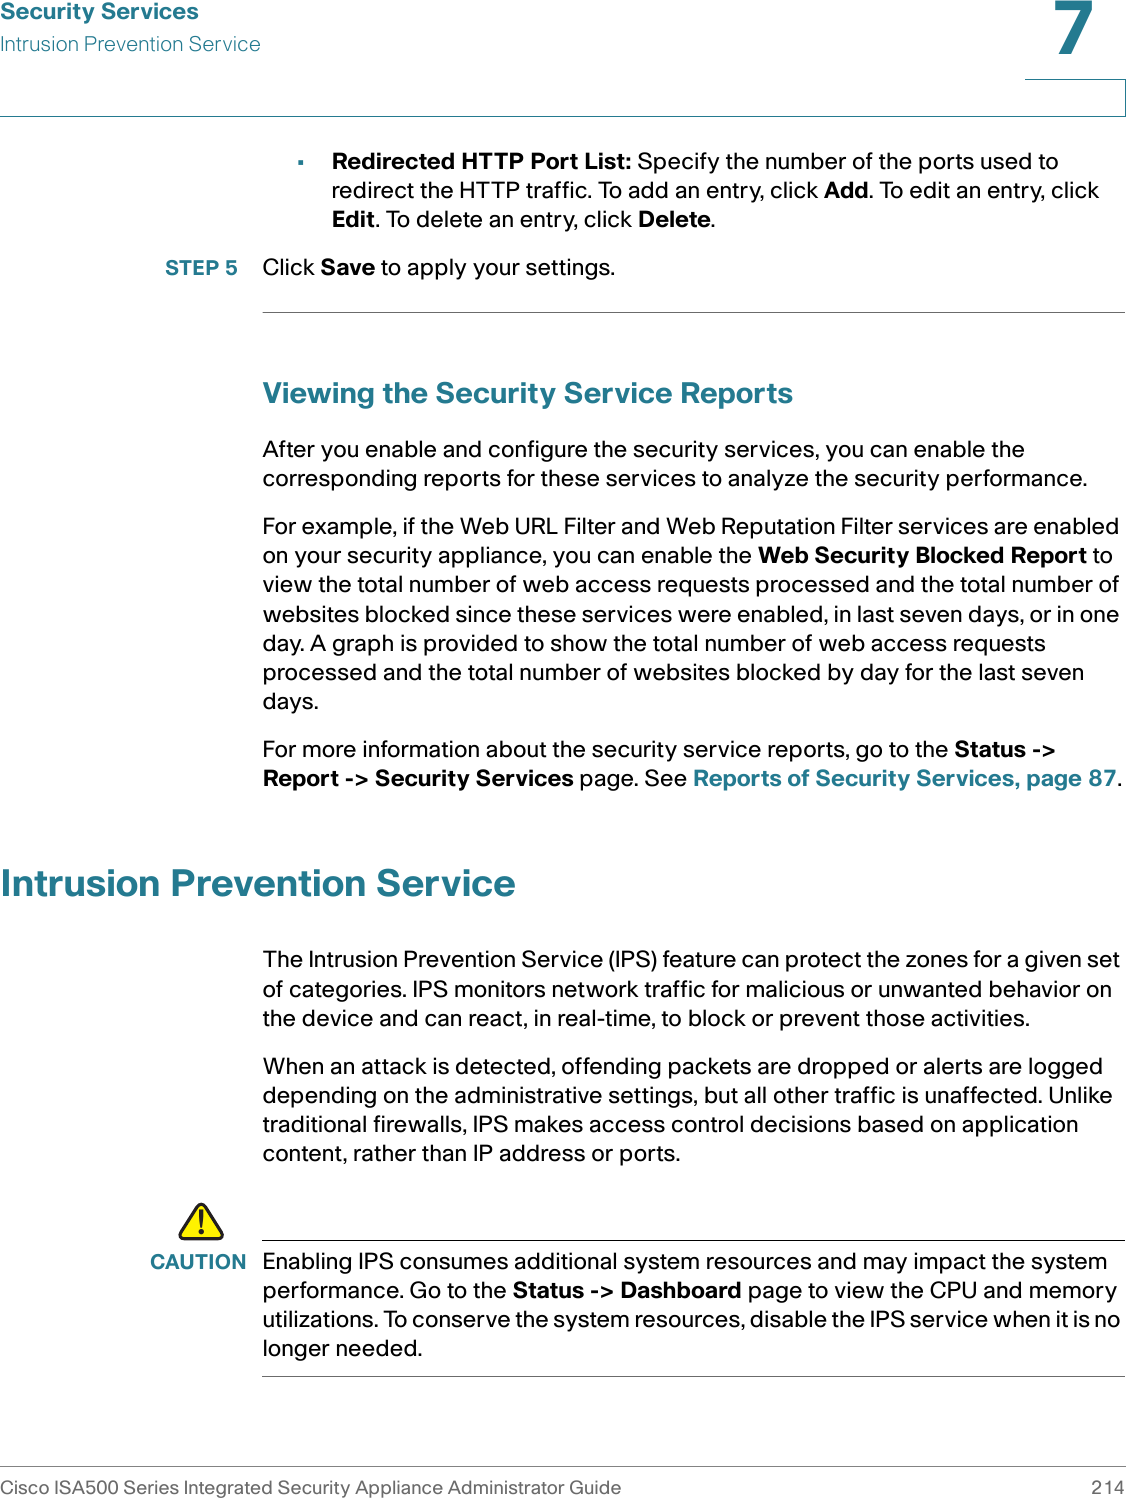 Security ServicesIntrusion Prevention ServiceCisco ISA500 Series Integrated Security Appliance Administrator Guide 2147 •Redirected HTTP Port List: Specify the number of the ports used to redirect the HTTP traffic. To add an entry, click Add. To edit an entry, click Edit. To delete an entry, click Delete.STEP 5 Click Save to apply your settings. Viewing the Security Service ReportsAfter you enable and configure the security services, you can enable the corresponding reports for these services to analyze the security performance. For example, if the Web URL Filter and Web Reputation Filter services are enabled on your security appliance, you can enable the Web Security Blocked Report to view the total number of web access requests processed and the total number of websites blocked since these services were enabled, in last seven days, or in one day. A graph is provided to show the total number of web access requests processed and the total number of websites blocked by day for the last seven days.For more information about the security service reports, go to the Status -&gt; Report -&gt; Security Services page. See Reports of Security Services, page 87.Intrusion Prevention ServiceThe Intrusion Prevention Service (IPS) feature can protect the zones for a given set of categories. IPS monitors network traffic for malicious or unwanted behavior on the device and can react, in real-time, to block or prevent those activities. When an attack is detected, offending packets are dropped or alerts are logged depending on the administrative settings, but all other traffic is unaffected. Unlike traditional firewalls, IPS makes access control decisions based on application content, rather than IP address or ports.!CAUTION Enabling IPS consumes additional system resources and may impact the system performance. Go to the Status -&gt; Dashboard page to view the CPU and memory utilizations. To conserve the system resources, disable the IPS service when it is no longer needed.